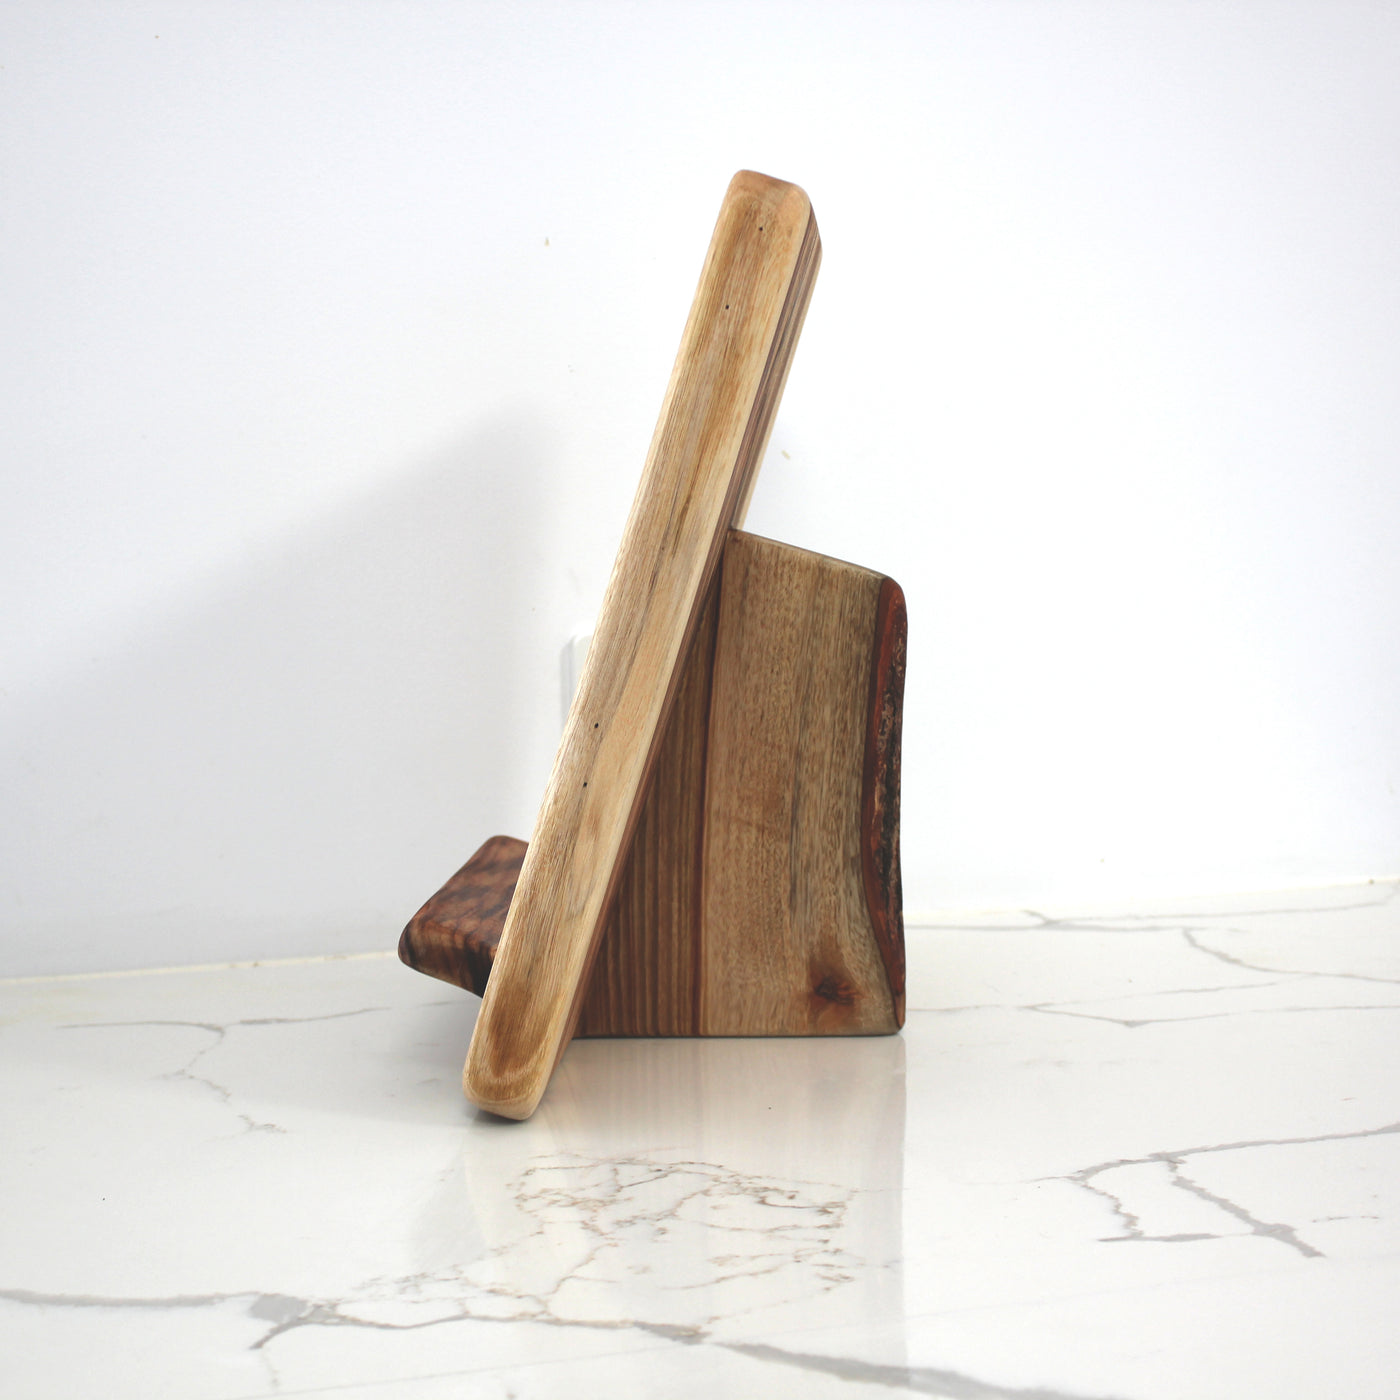 Solid Timber Ipad/Tablet Stand